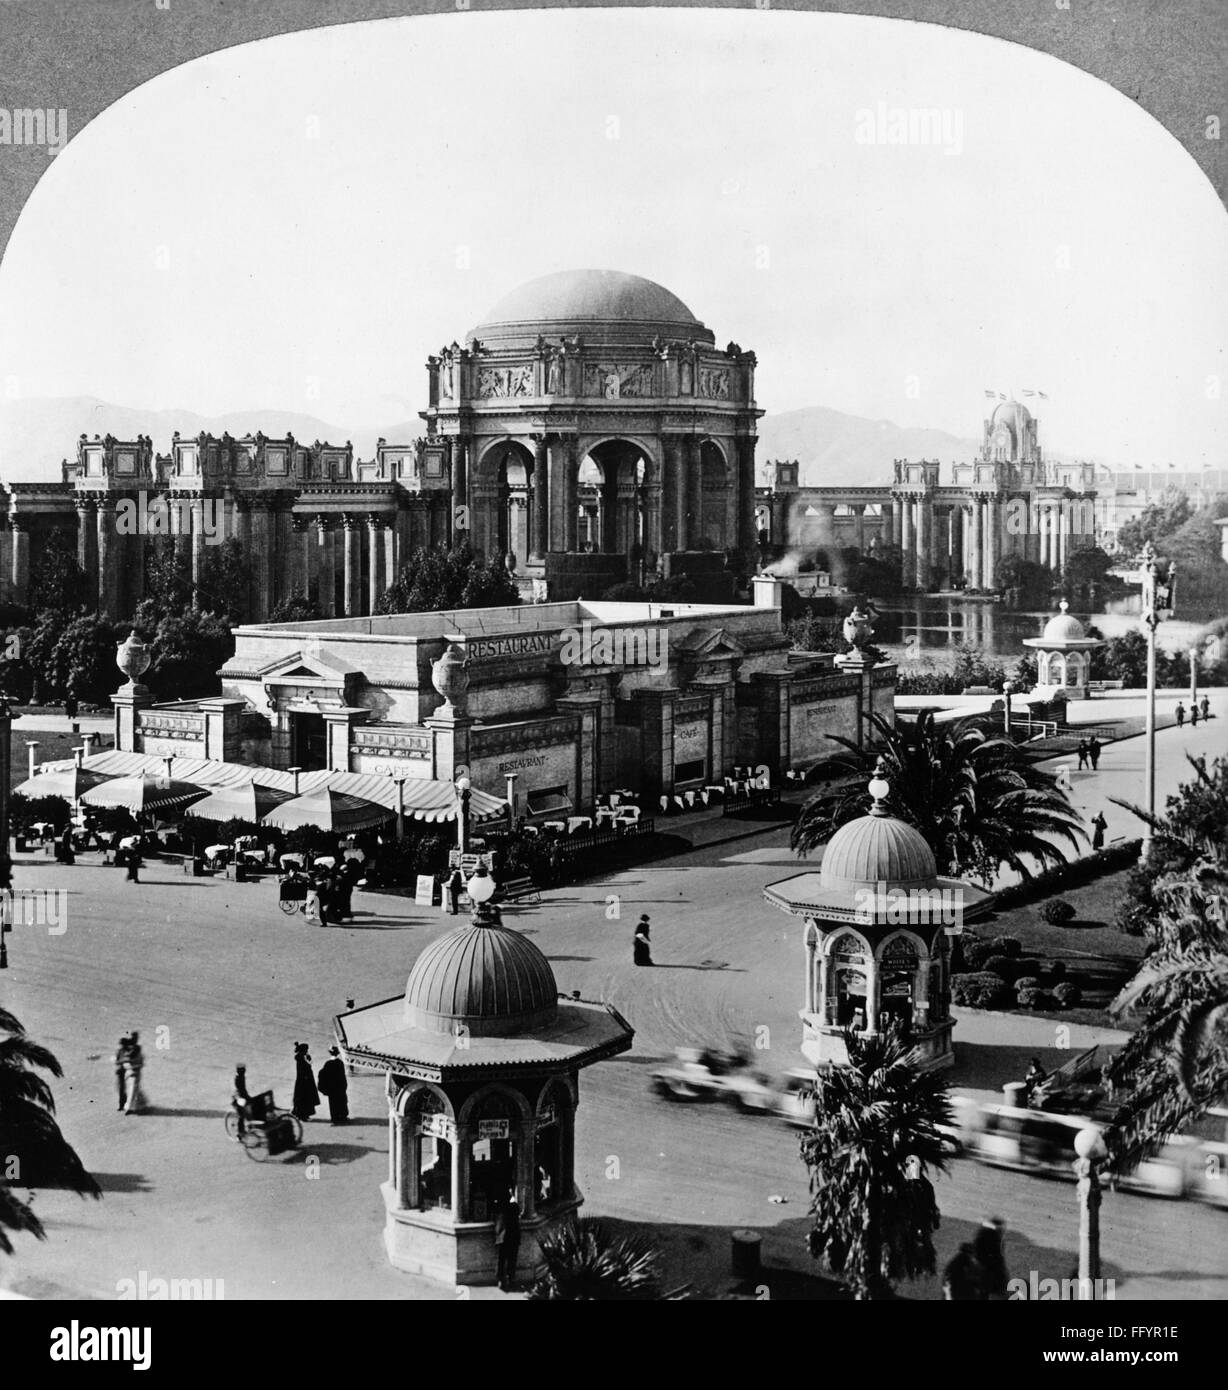 PANAMA-PACIFIC EXPOSITION. /nThe Palace of Fine Arts at the Panama-Pacific Exposition in San Francisco, California. Stereograph, 1915. Stock Photo